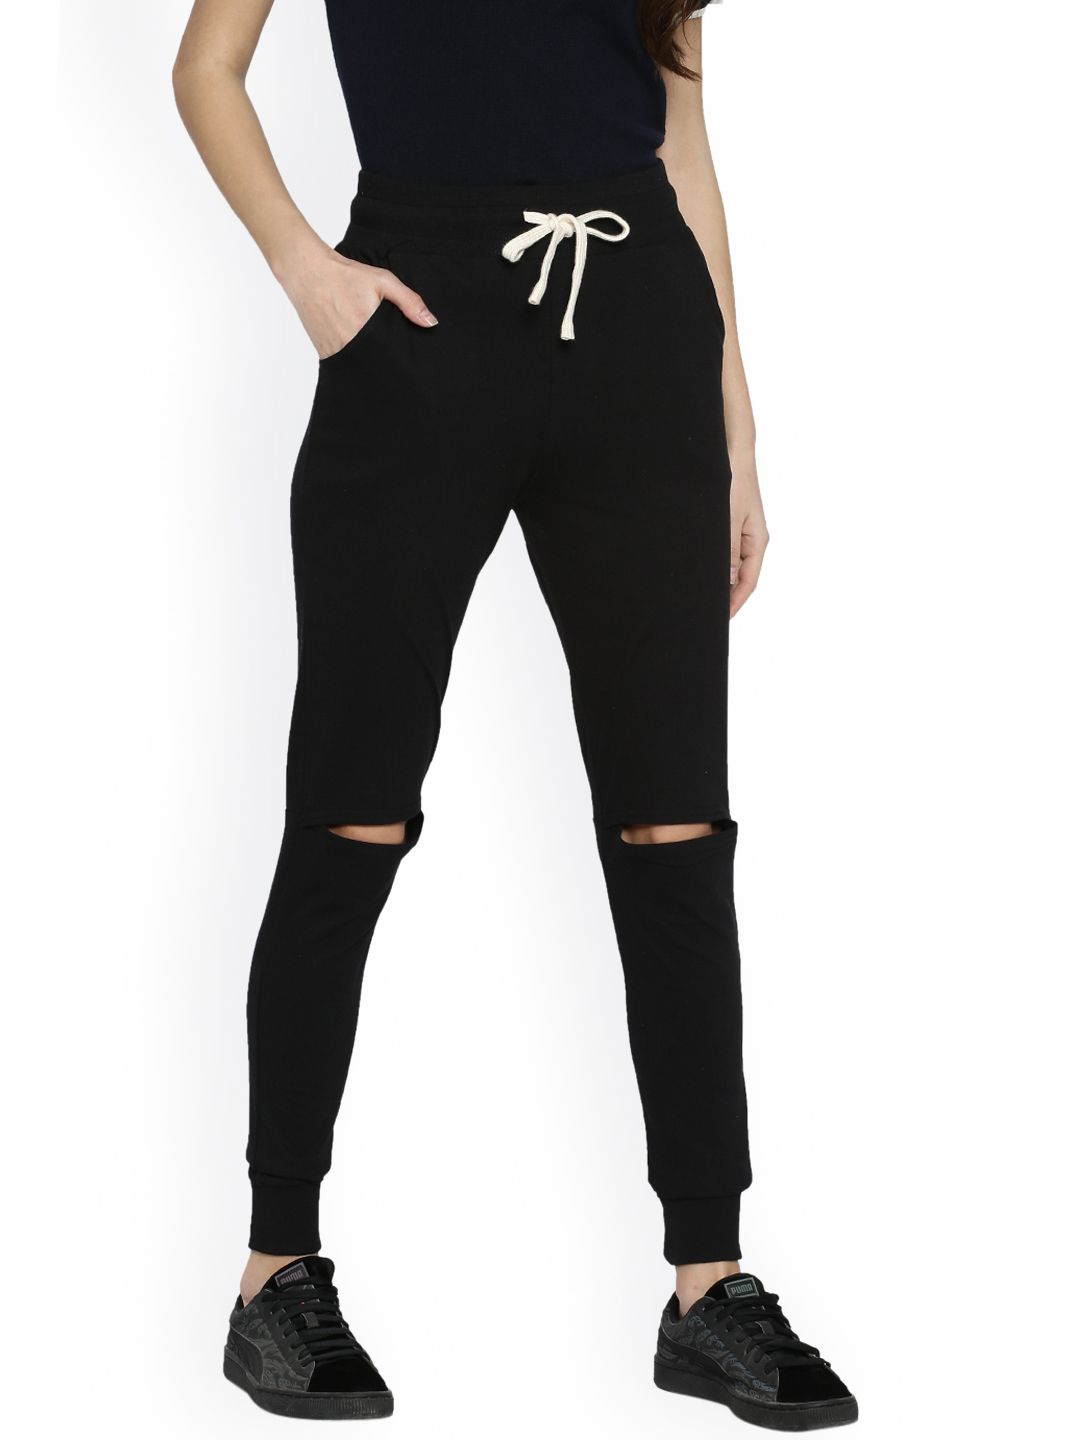 Campus Sutra Black Ripped Joggers Price in India